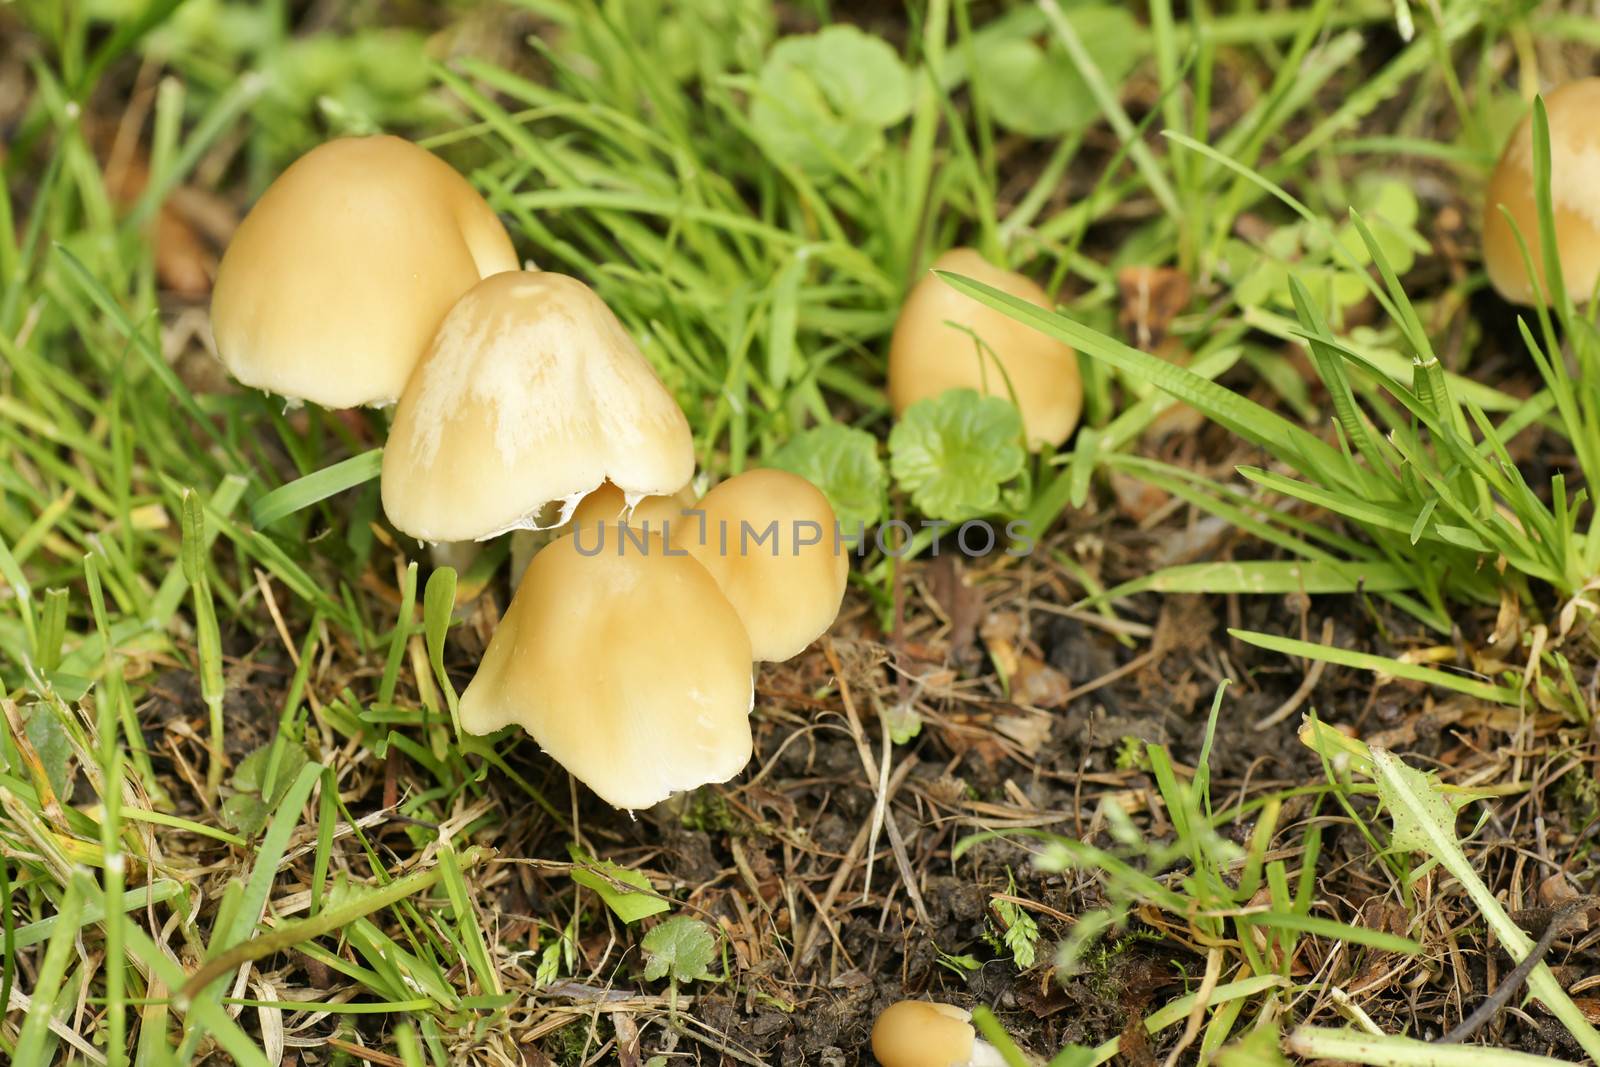 Mushrooms on lawn by Mirage3